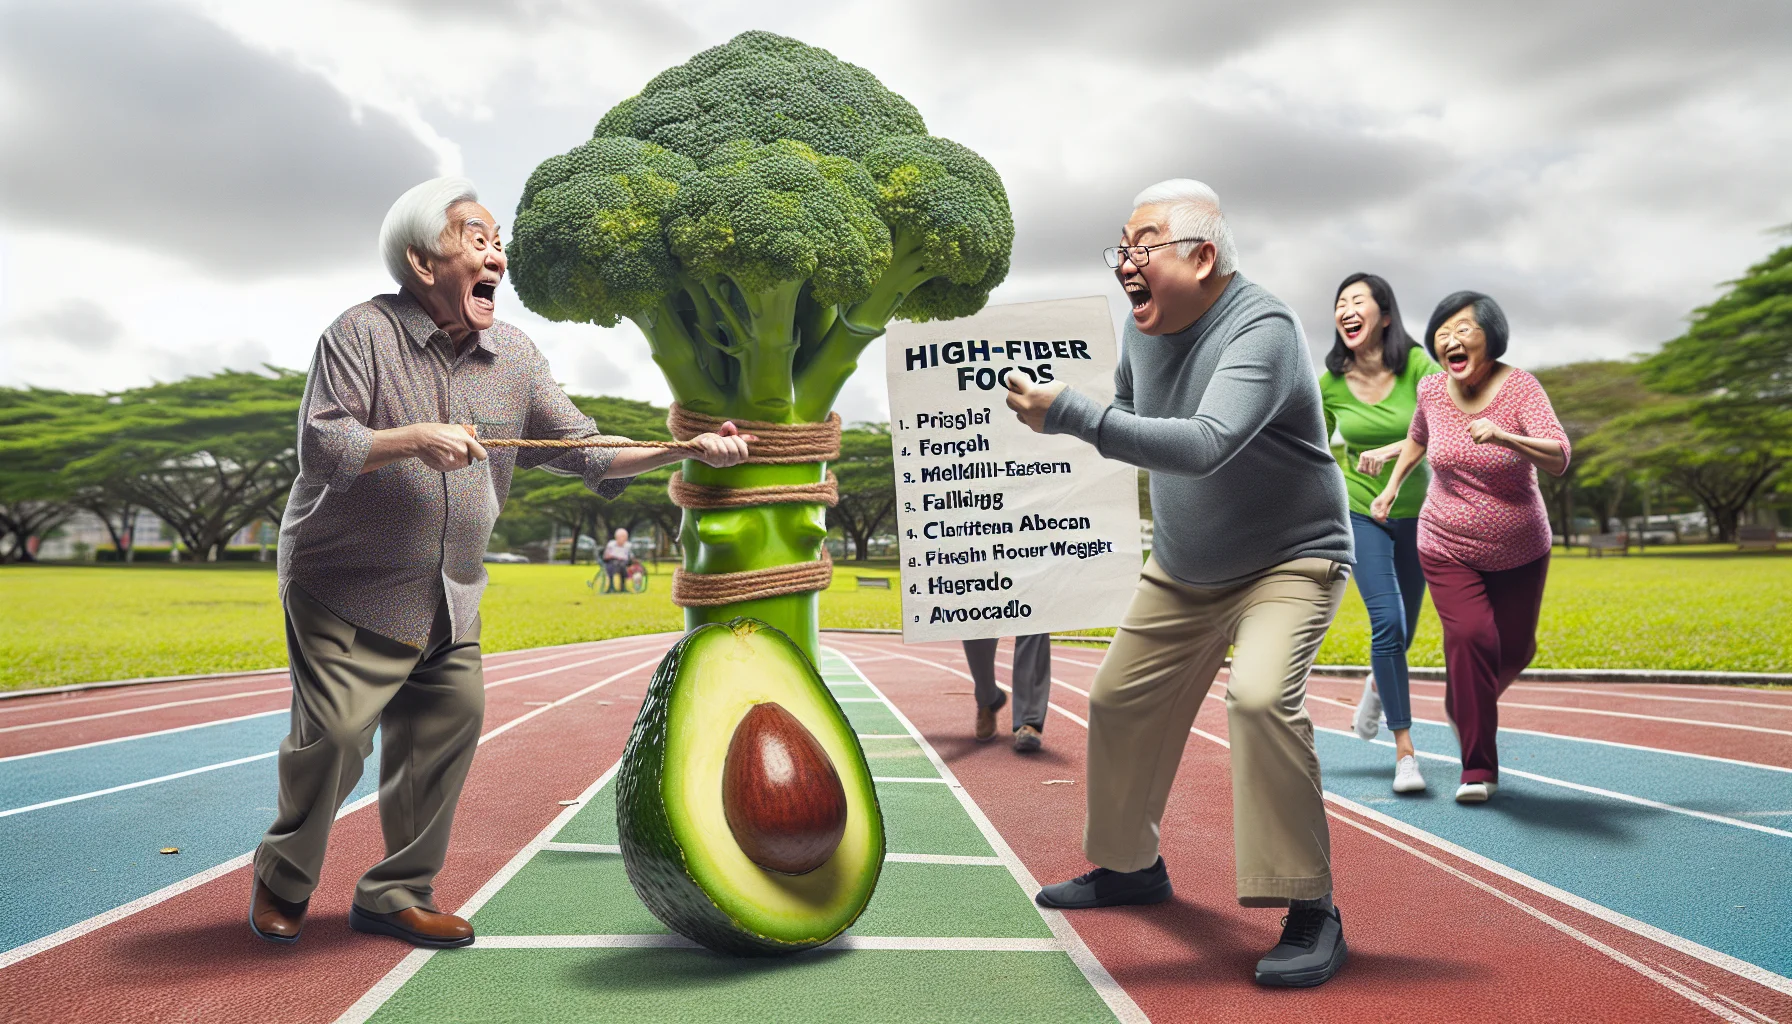 Create a humorous, realistic image that showcases a list of high-fiber foods for weight loss. The list is cleverly integrated into a humorous scene involving older adults. Perhaps show an elderly Caucasian man and a Middle-Eastern woman engaging in a friendly tug of war over a large piece of broccoli, while a South Asian woman is chasing a runaway avocado on a walking track. They are all in a park, laughing and clearly having a good time. Incorporate other high-fiber foods in the visual elements subtly. This is a playful take on dieting and healthy eating for older people.